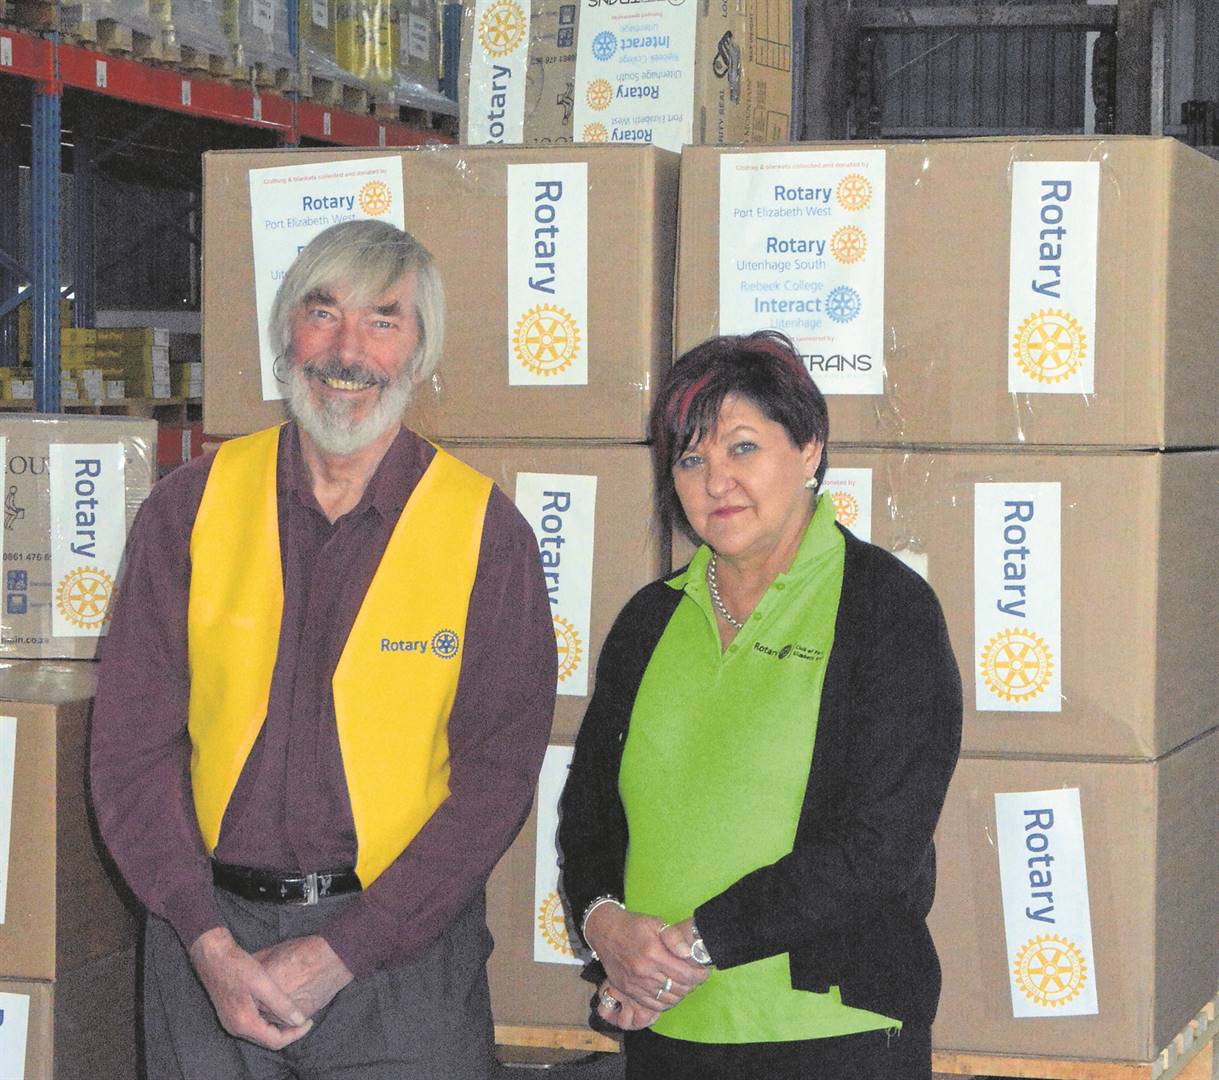 Clive Hassell, President of the Rotary Club of Uitenhage South and Karin Knoesen, past president of the Rotary Club of Port Elizabeth West with the consignment of clothing and blankets heading for Durban. 